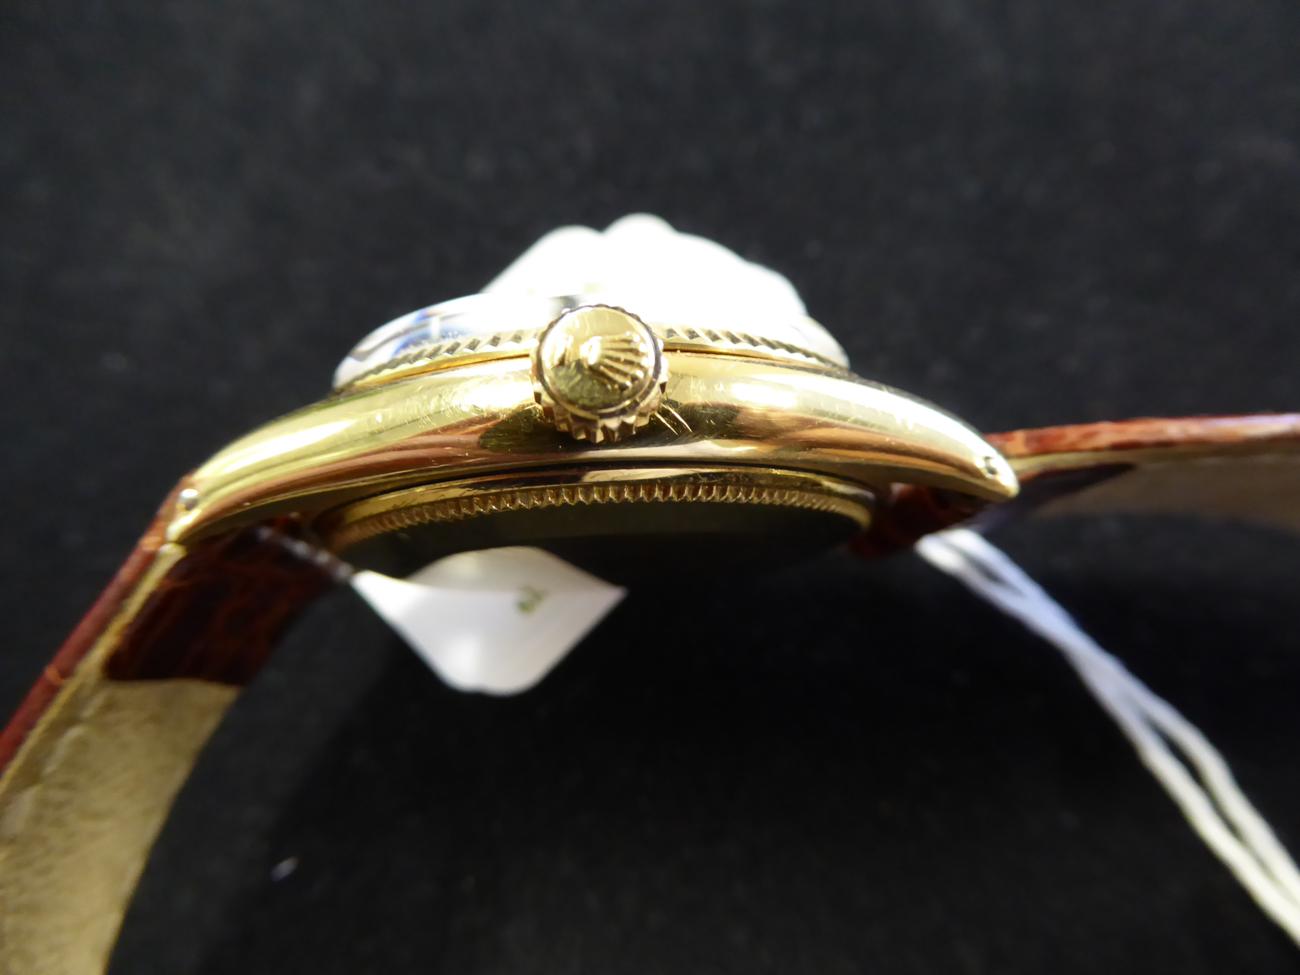 An 18ct Gold Automatic Centre Seconds Wristwatch, signed Rolex, Oyster Perpetual, Officially - Image 3 of 8